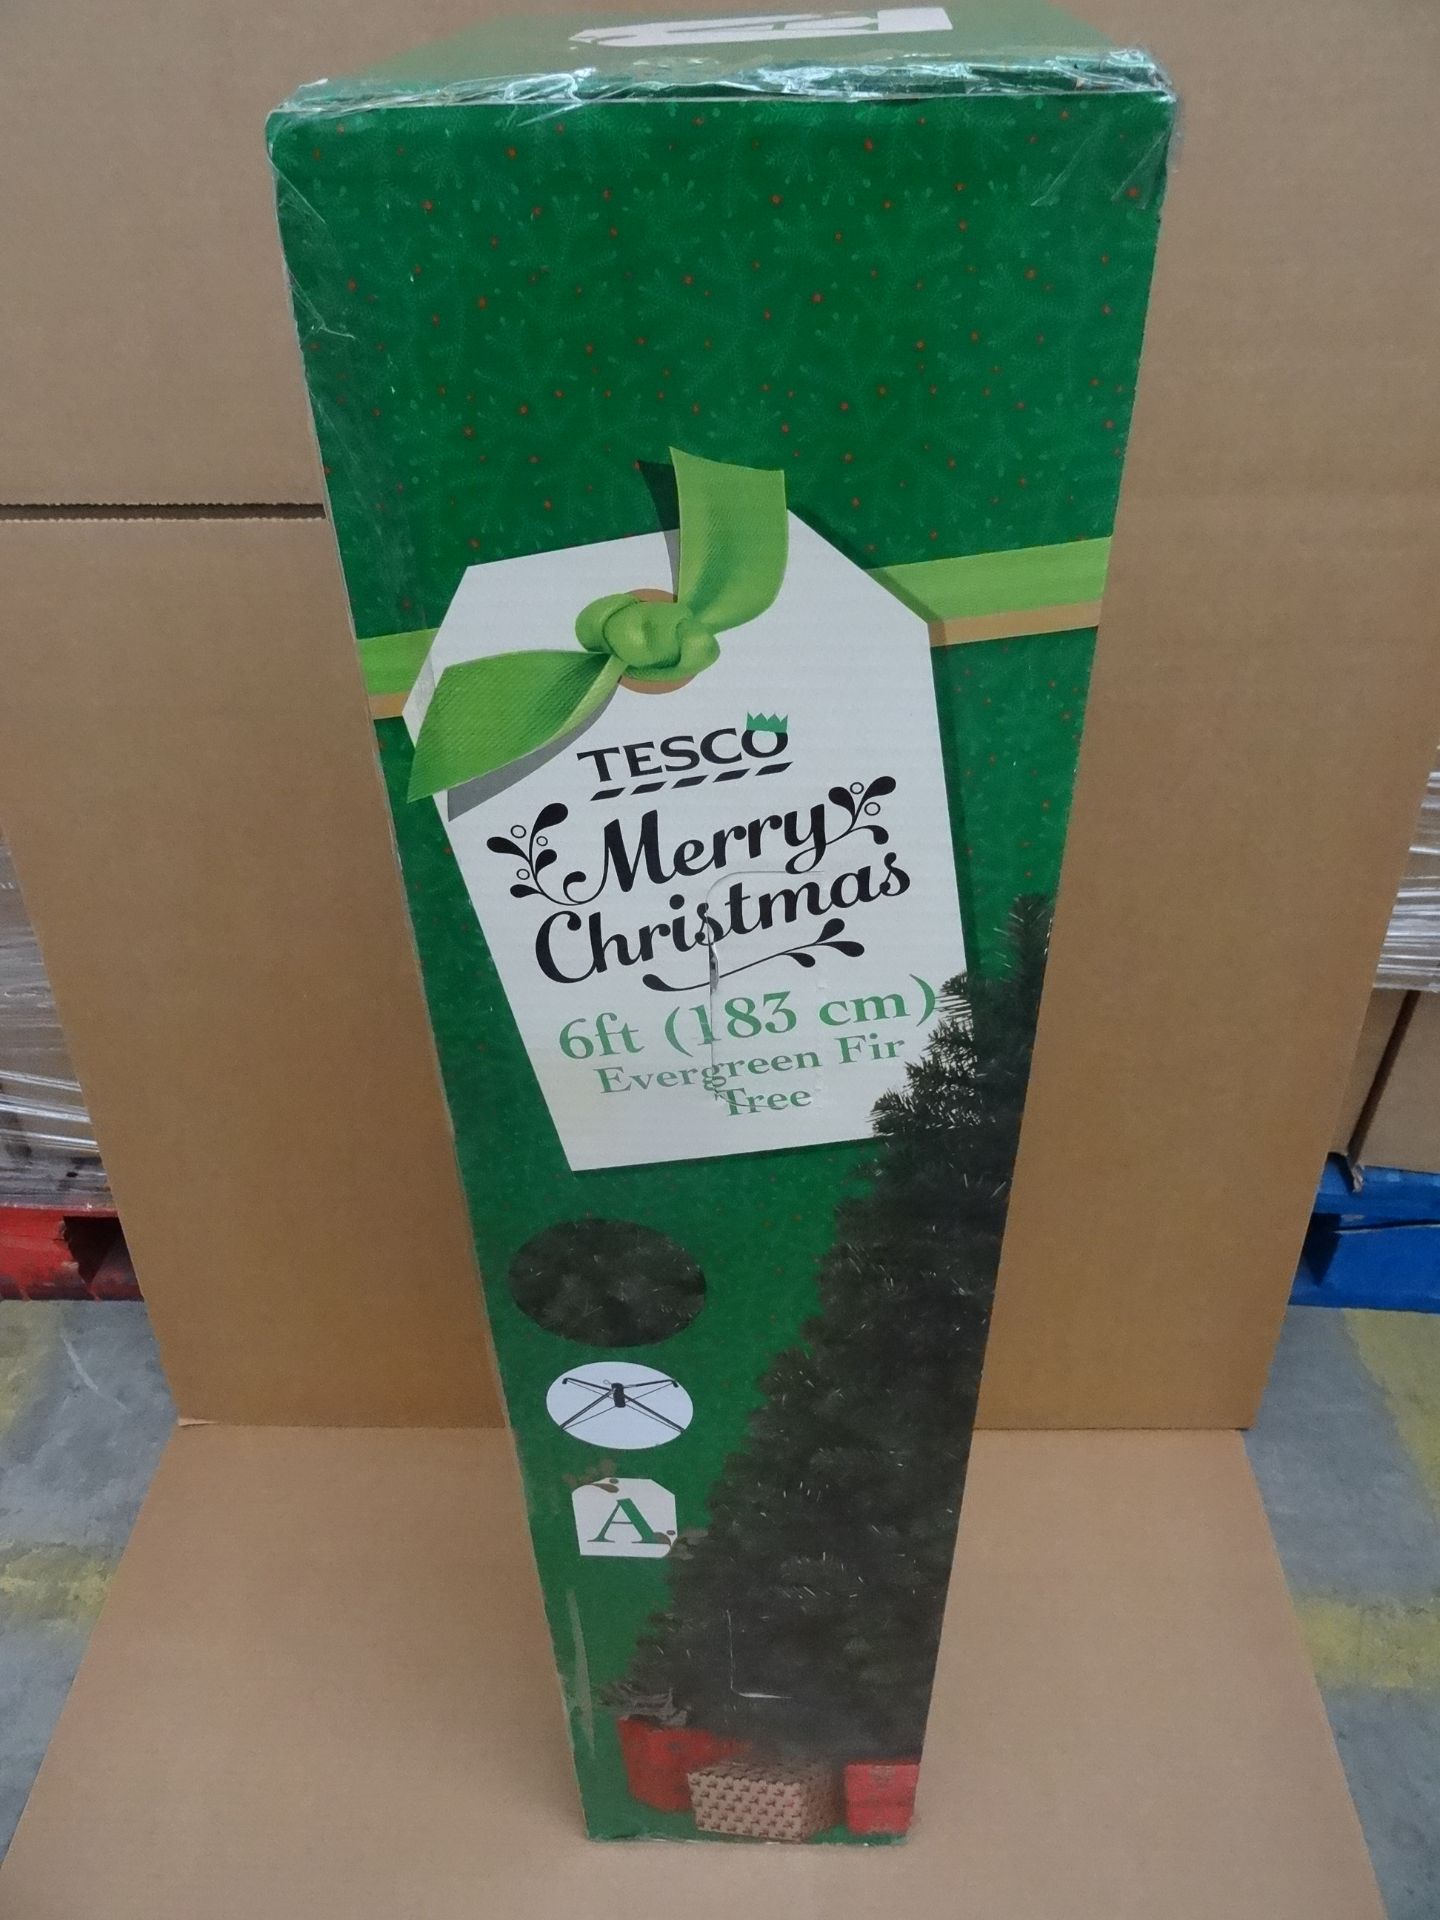 9 x TESCO 6 FOOT (183CM) EVERGREEN CHRISTMAS TREES. BRAND NEW AND BOXED! Original RRP £75 each,